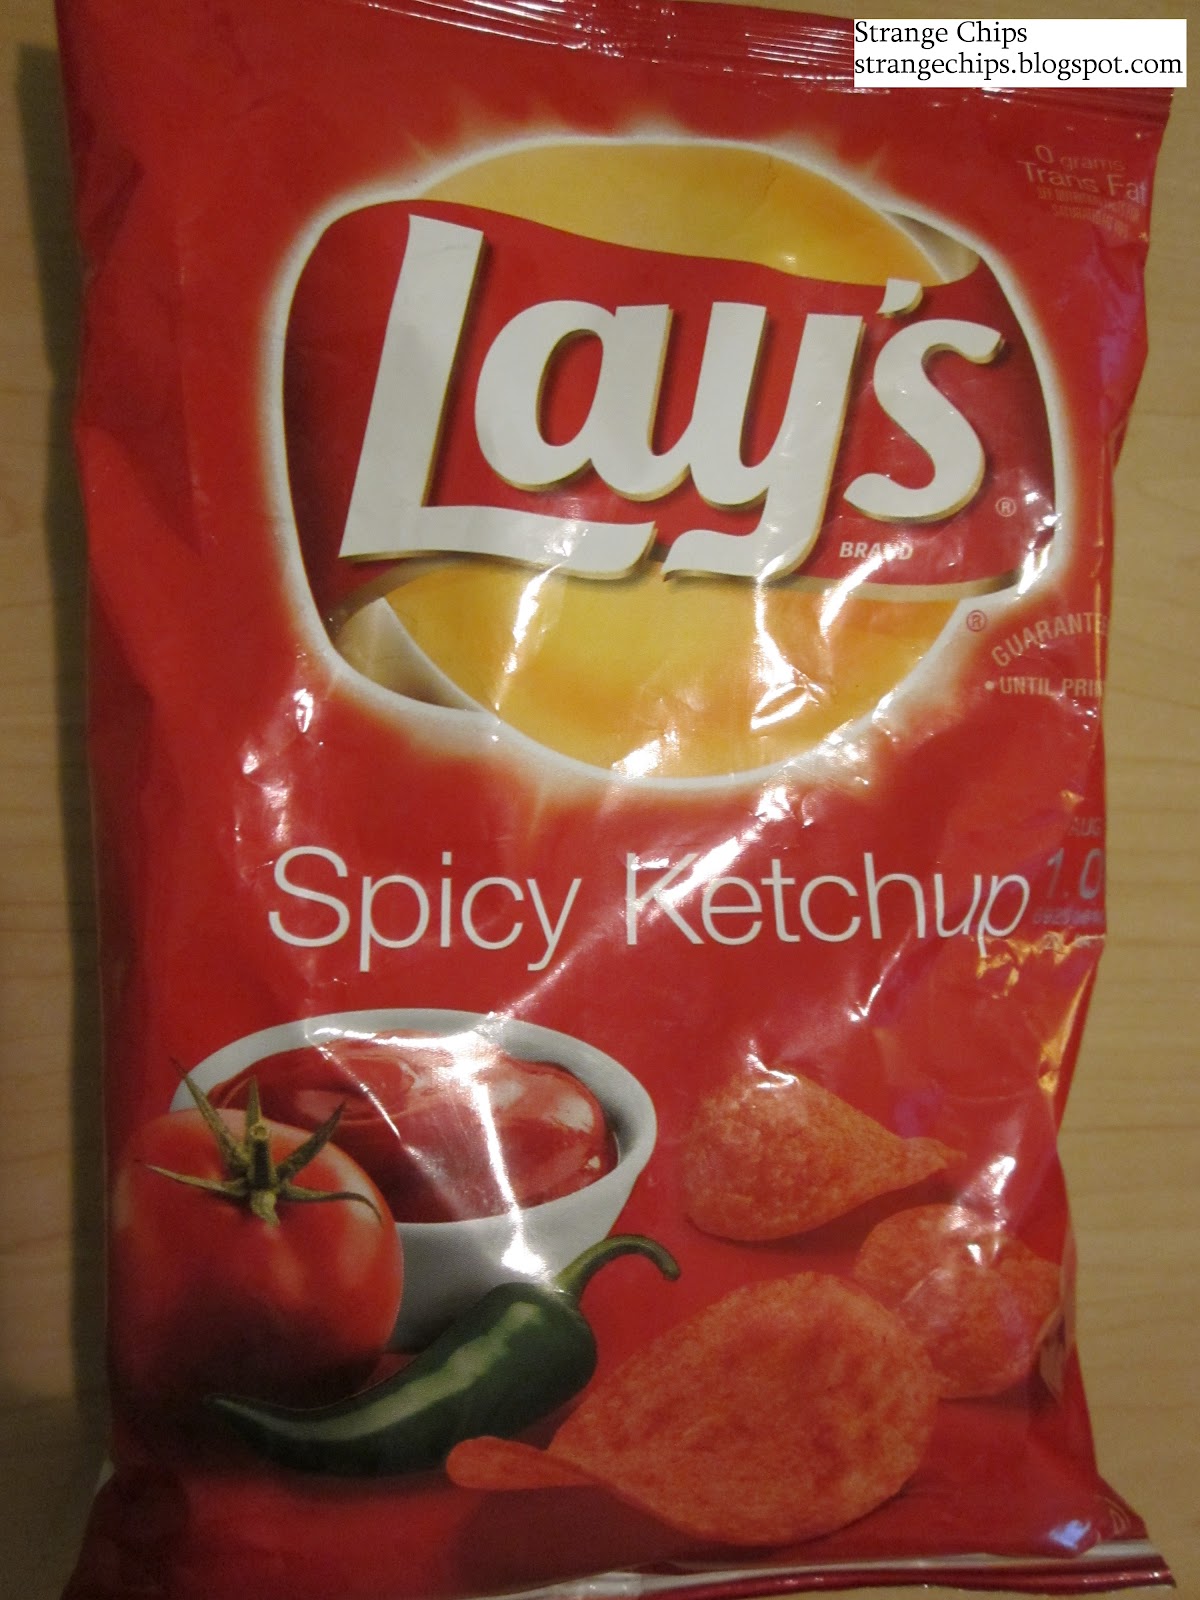 Strange Chips: Lay's Spicy Ketchup